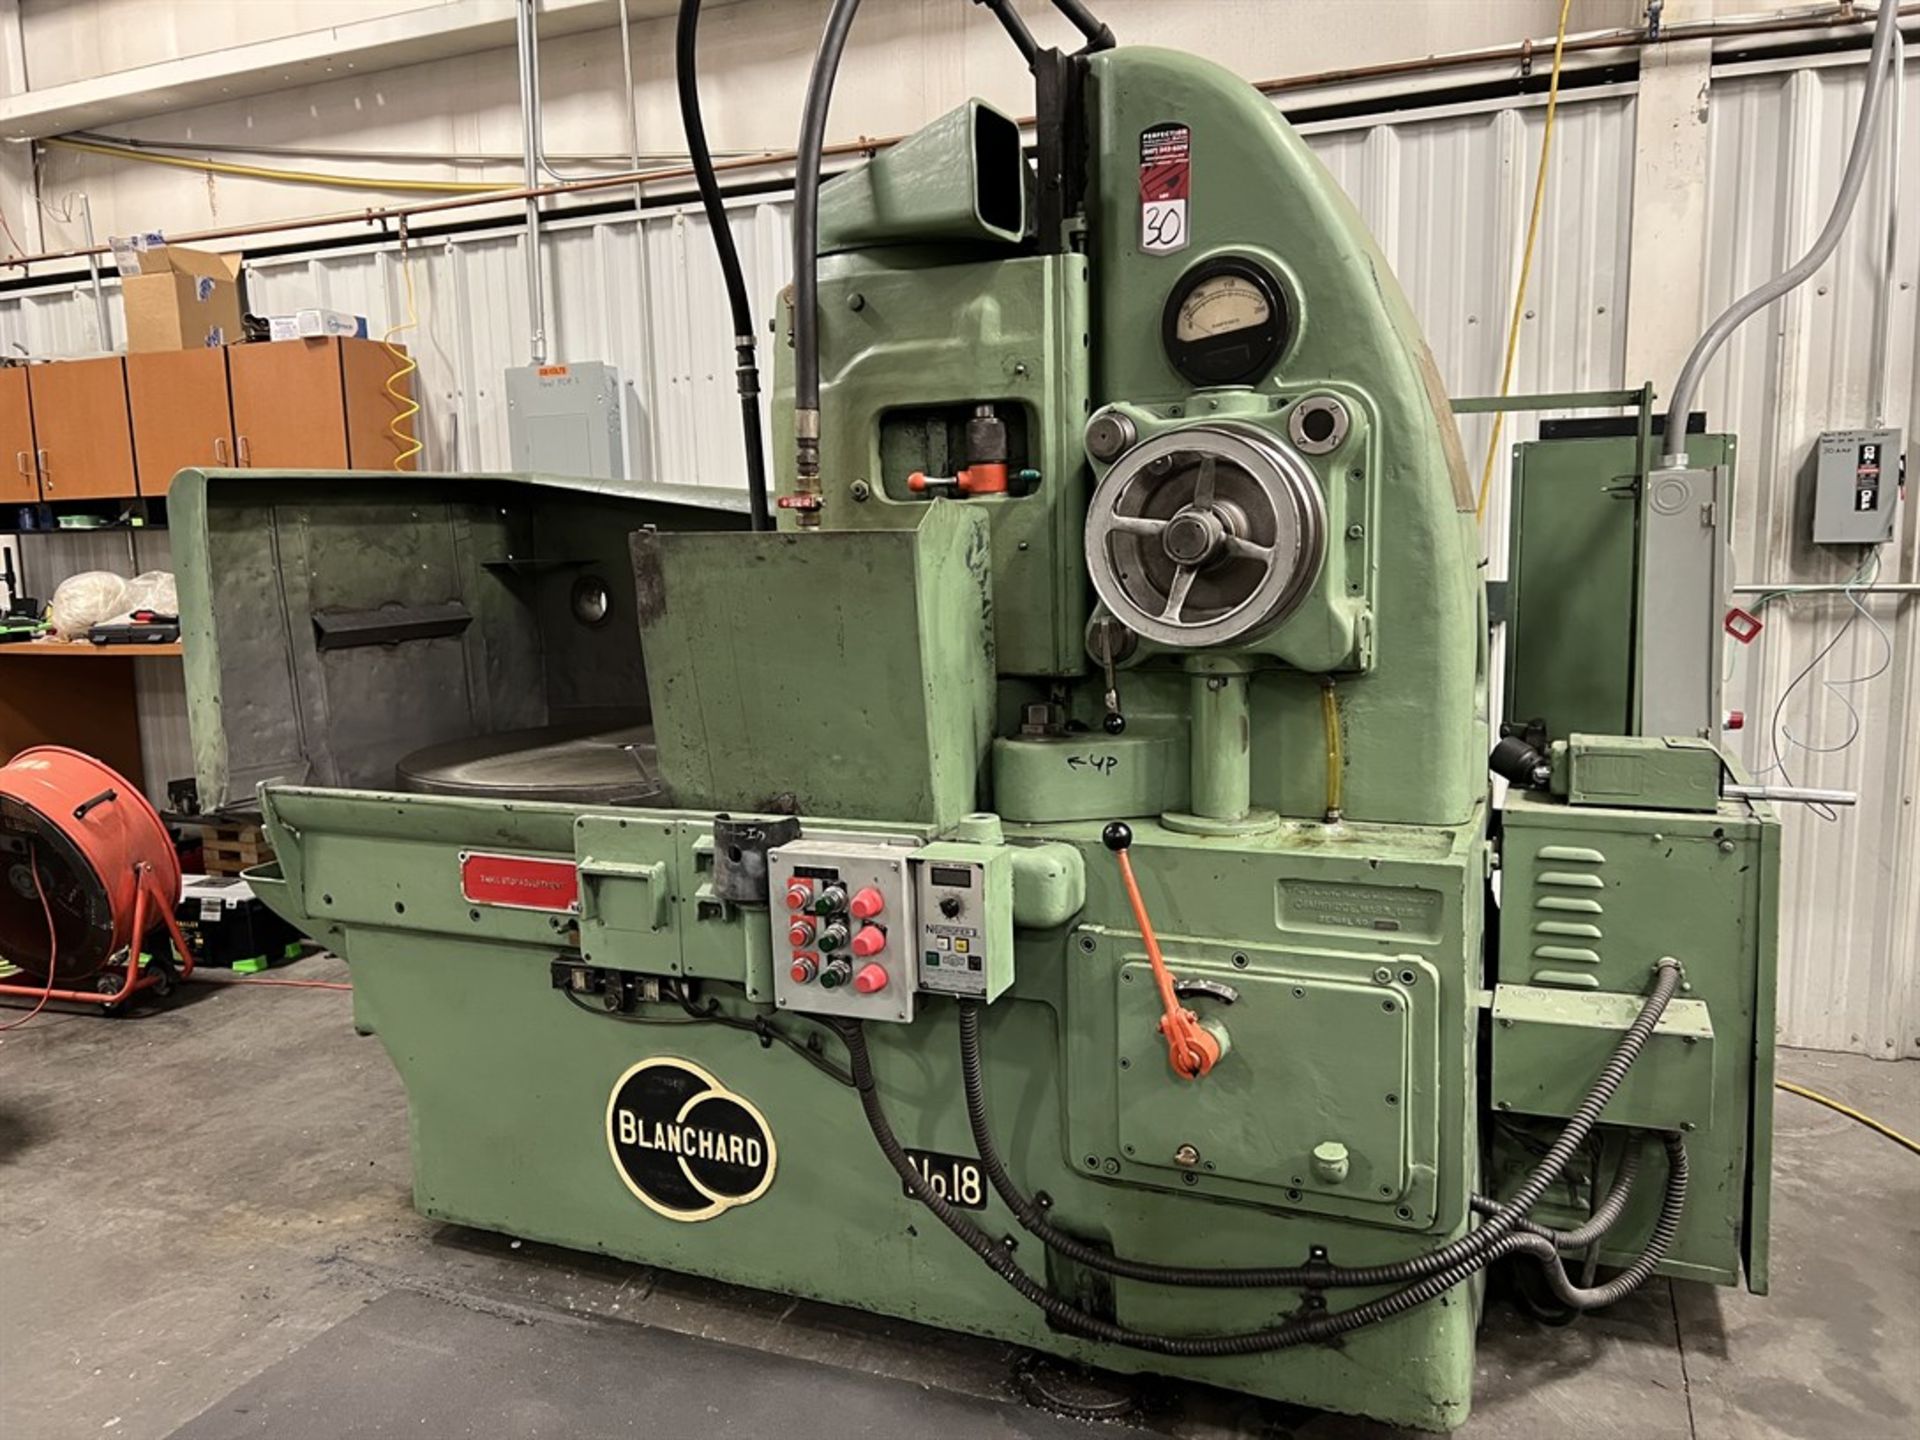 BLANCHARD No. 18 Rotary Surface Grinder, s/n 4678, 36" Dia Magnetic Chuck w/ Neutrofier, Segmented - Image 2 of 11